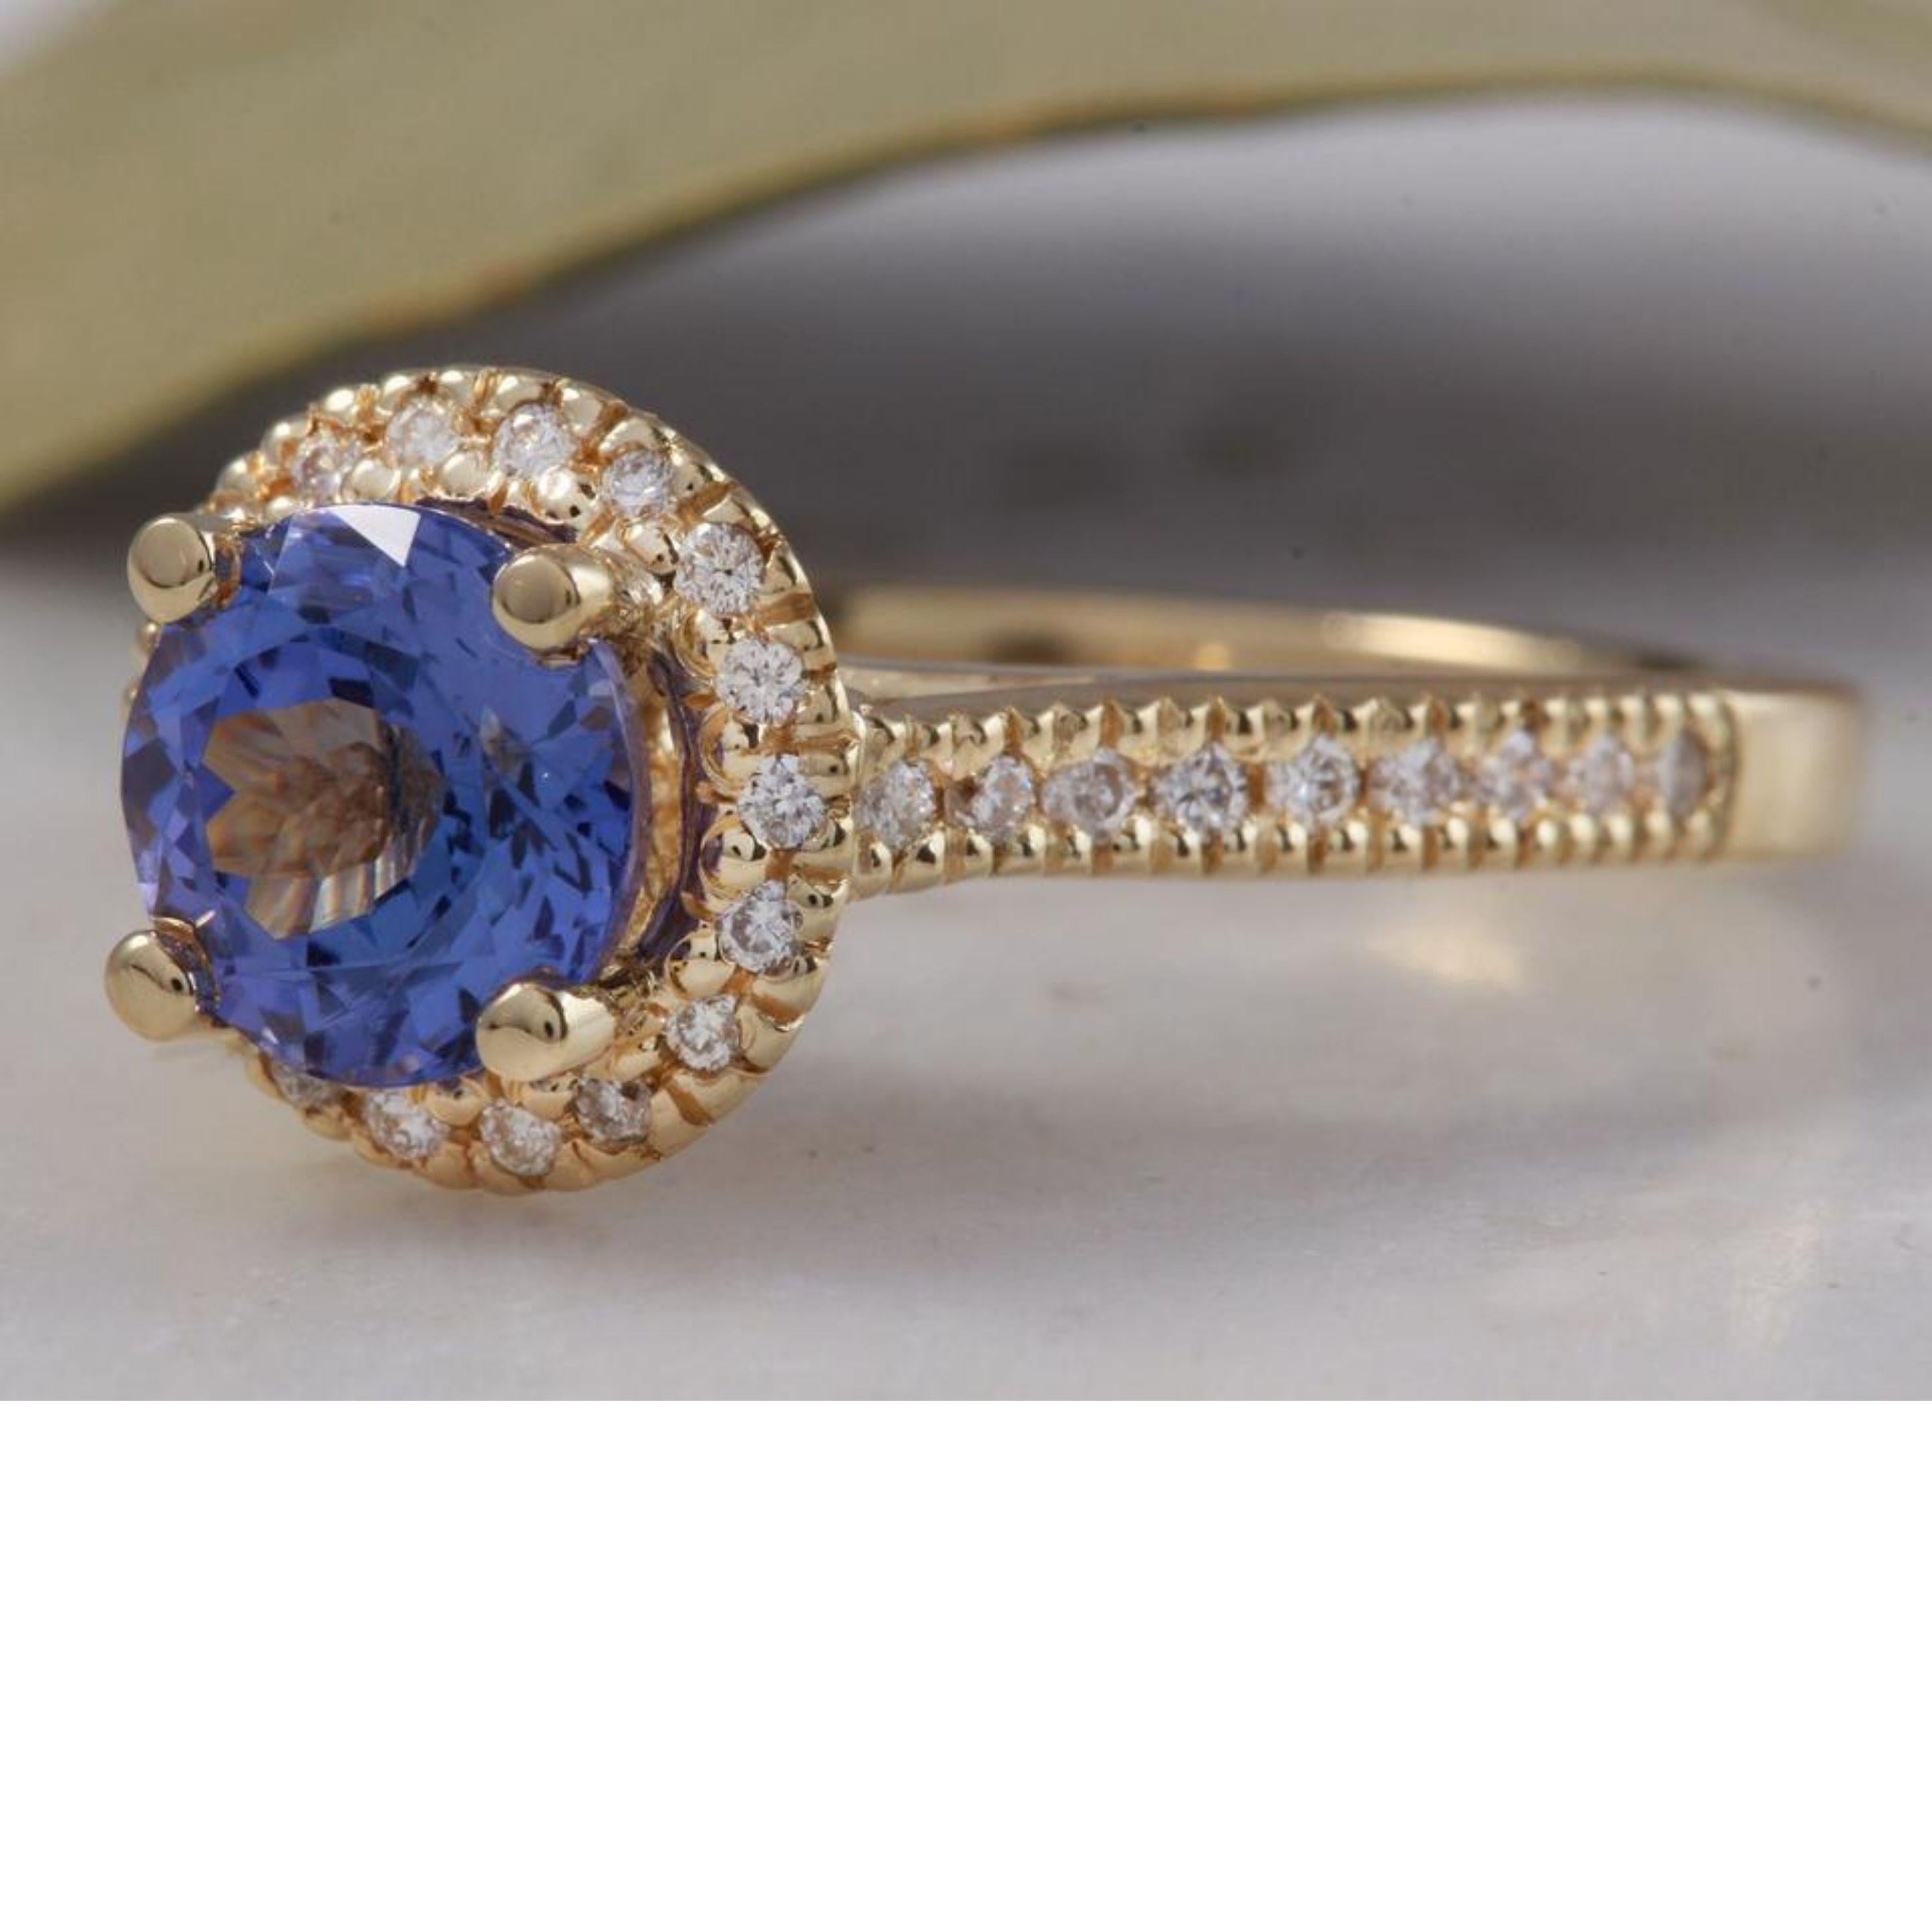 2.00 Carats Natural Impressive Tanzanite and Diamond 14K Solid Yellow Gold Ring

Total Tanzanite Weight is: 1.55 Carats

Tanzanite Measures: 7mm

Natural Round Diamonds Weight: 0.45 Carats (color G-H / Clarity SI1-SI2)

Ring size: 7 (we offer free